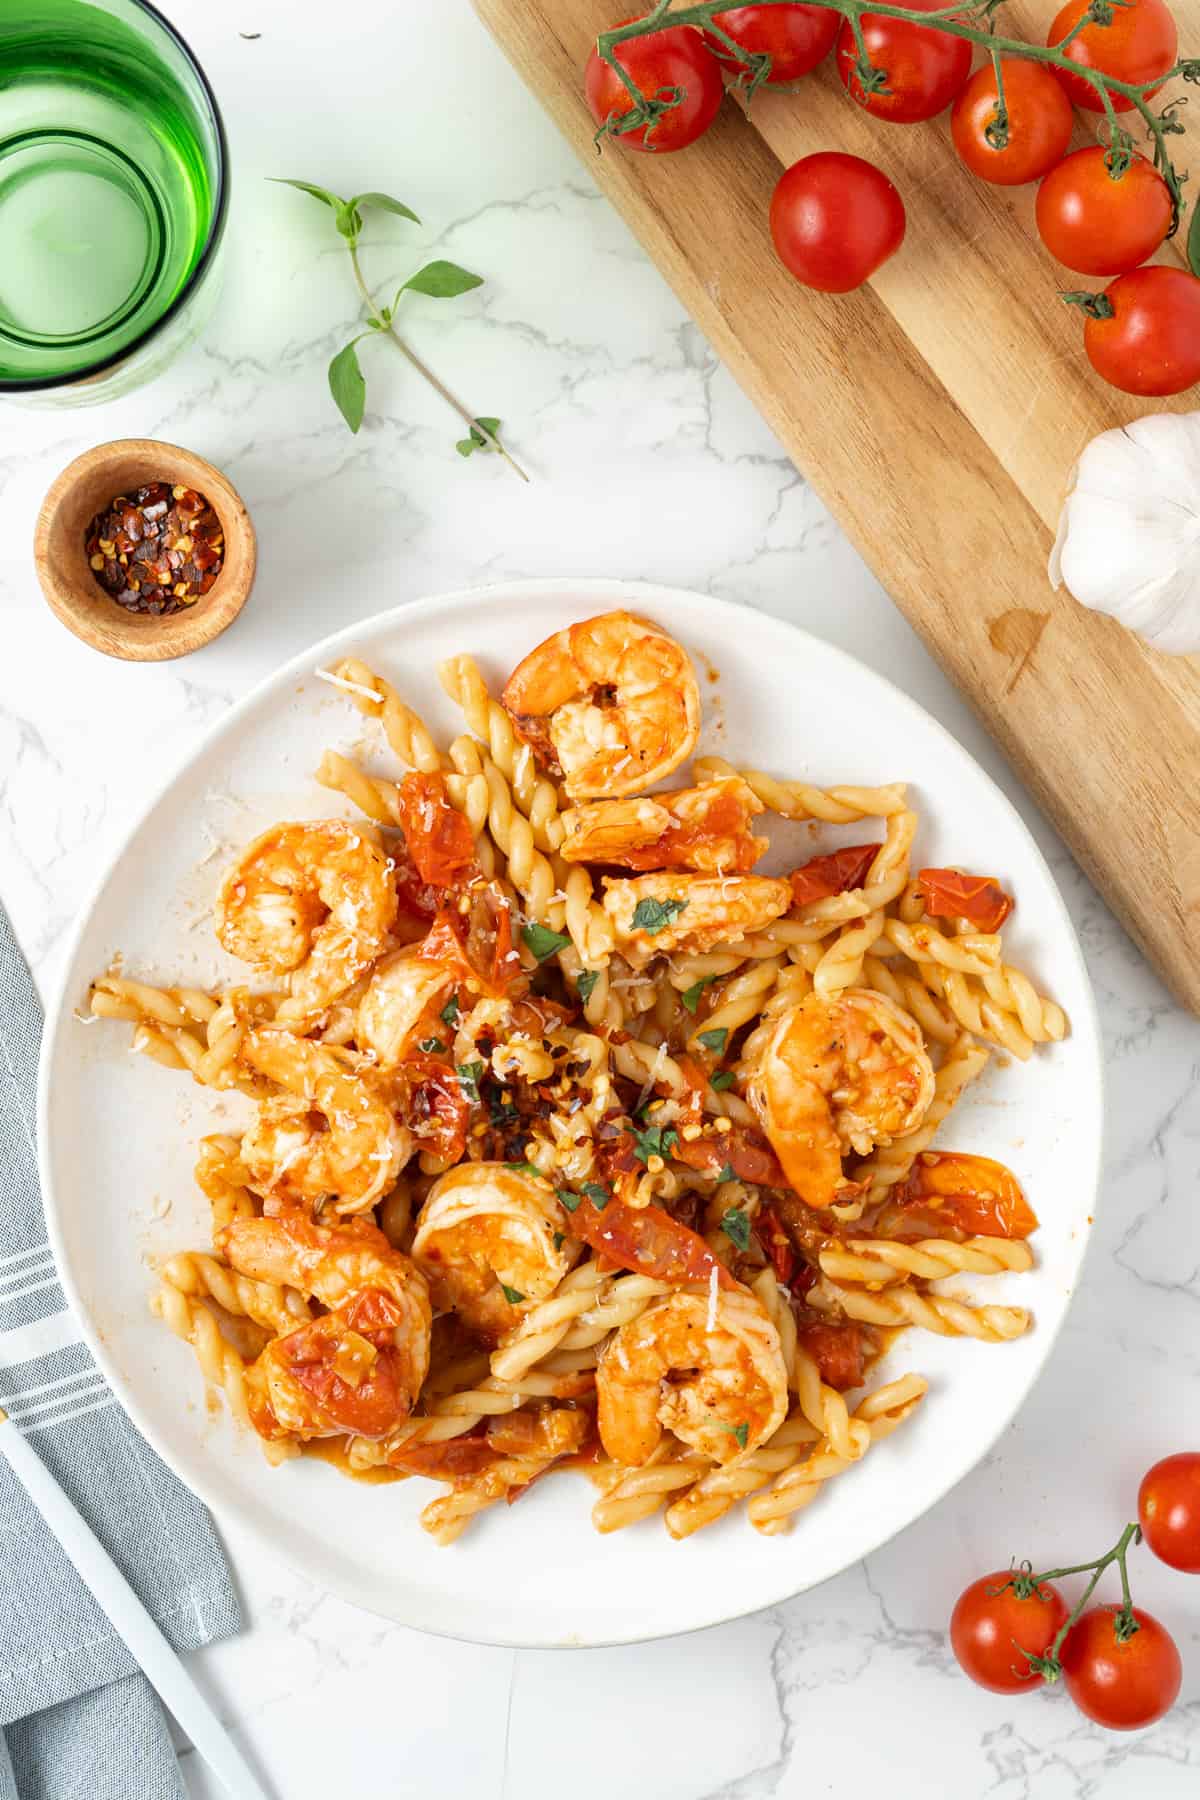 Shrimp pasta with tomatoes and chili flakes.